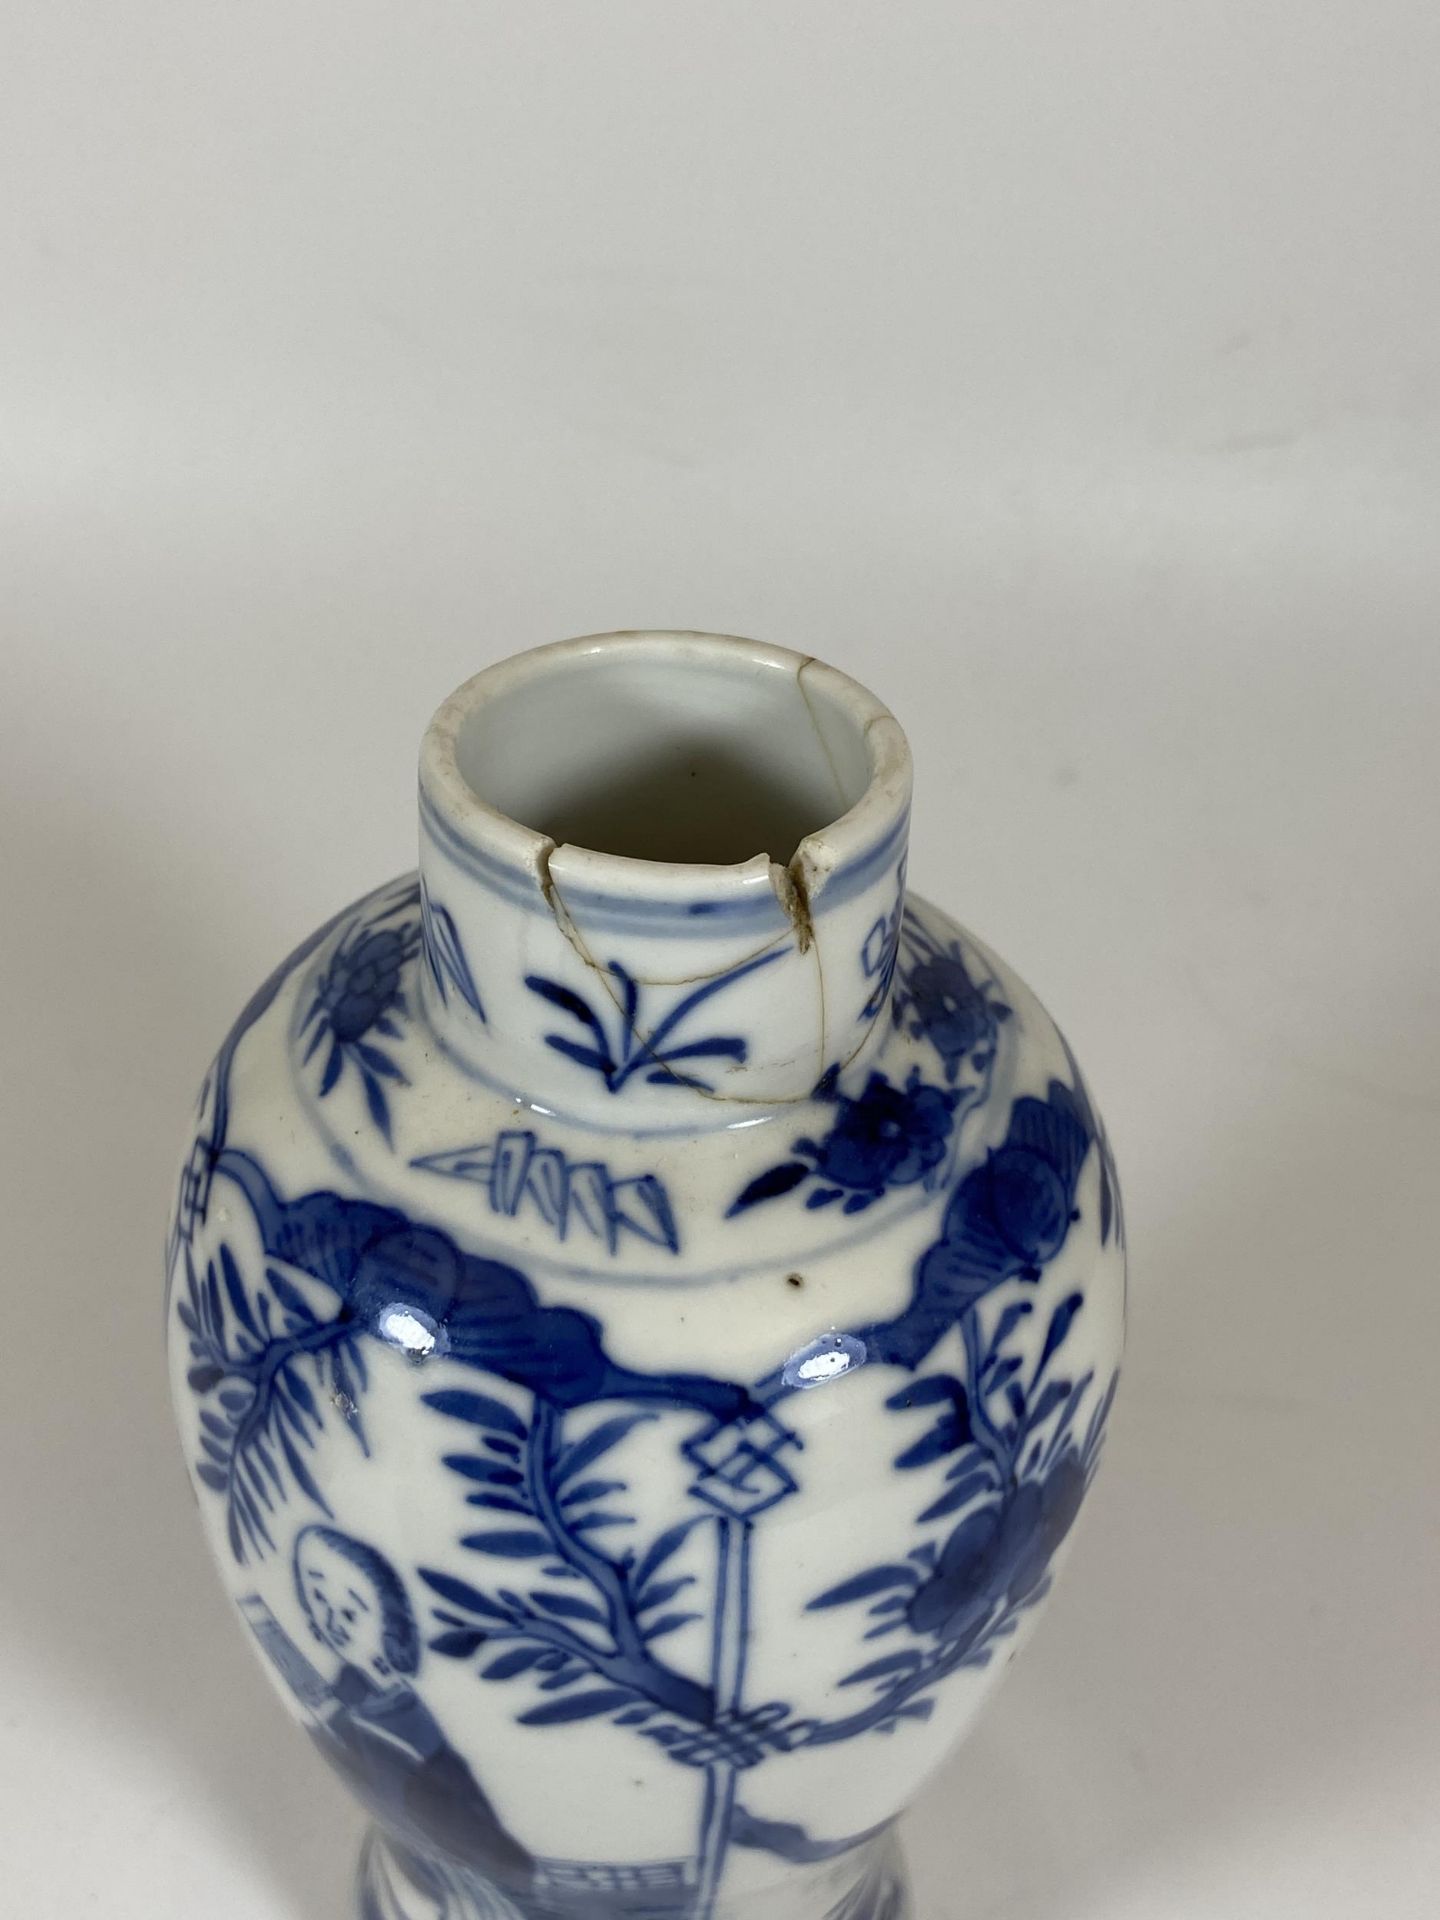 A LATE 19TH CENTURY CHINESE KANGXI STYLE BLUE AND WHITE FIGURAL DESIGN VASE, HEIGHT 18CM - Image 4 of 6